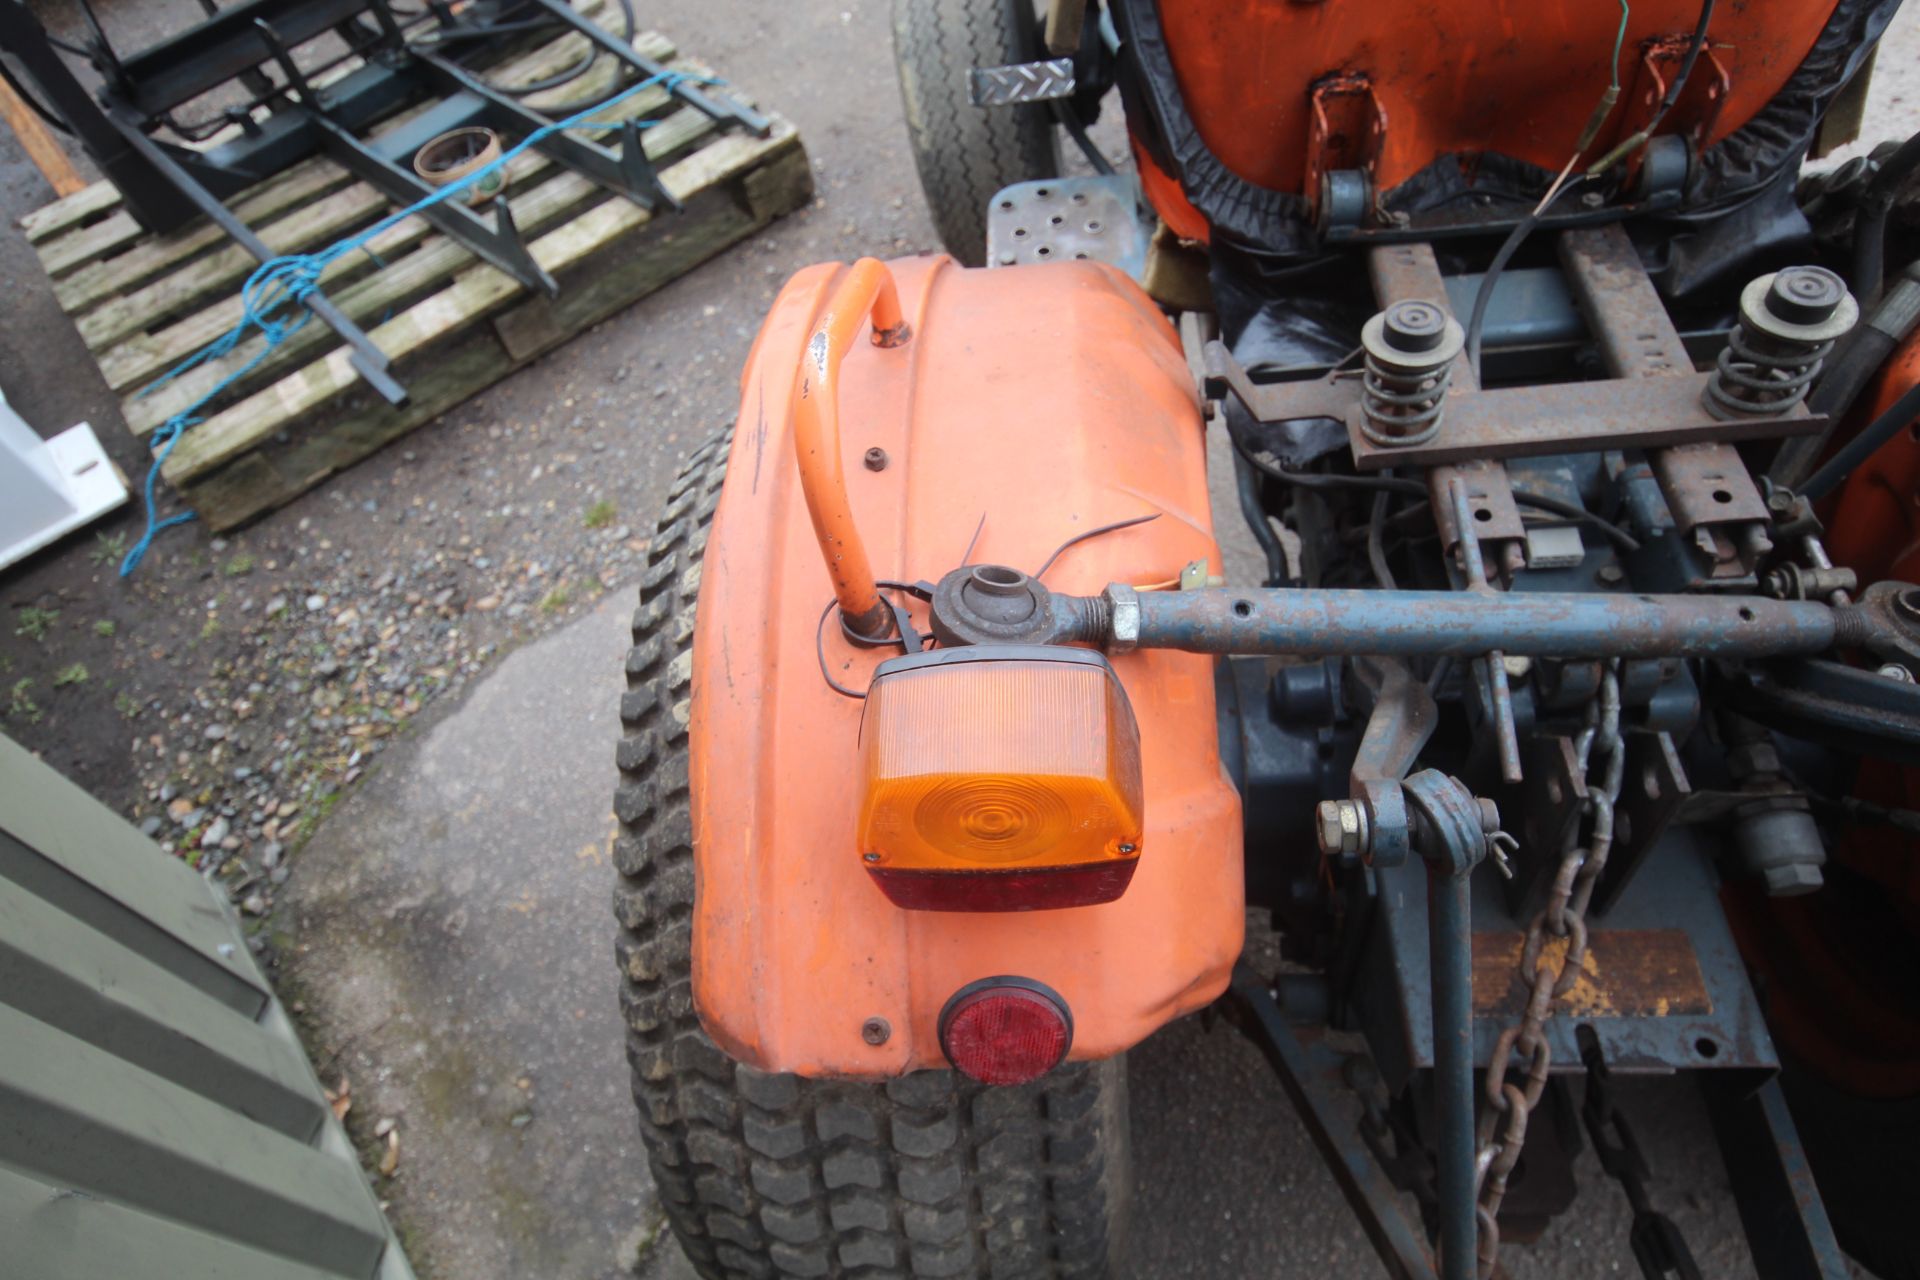 Kubota B7100 HST 4WD compact tractor. 3,134 hours. 29/12.00-15 rear turf wheels and tyres. Front - Image 20 of 41